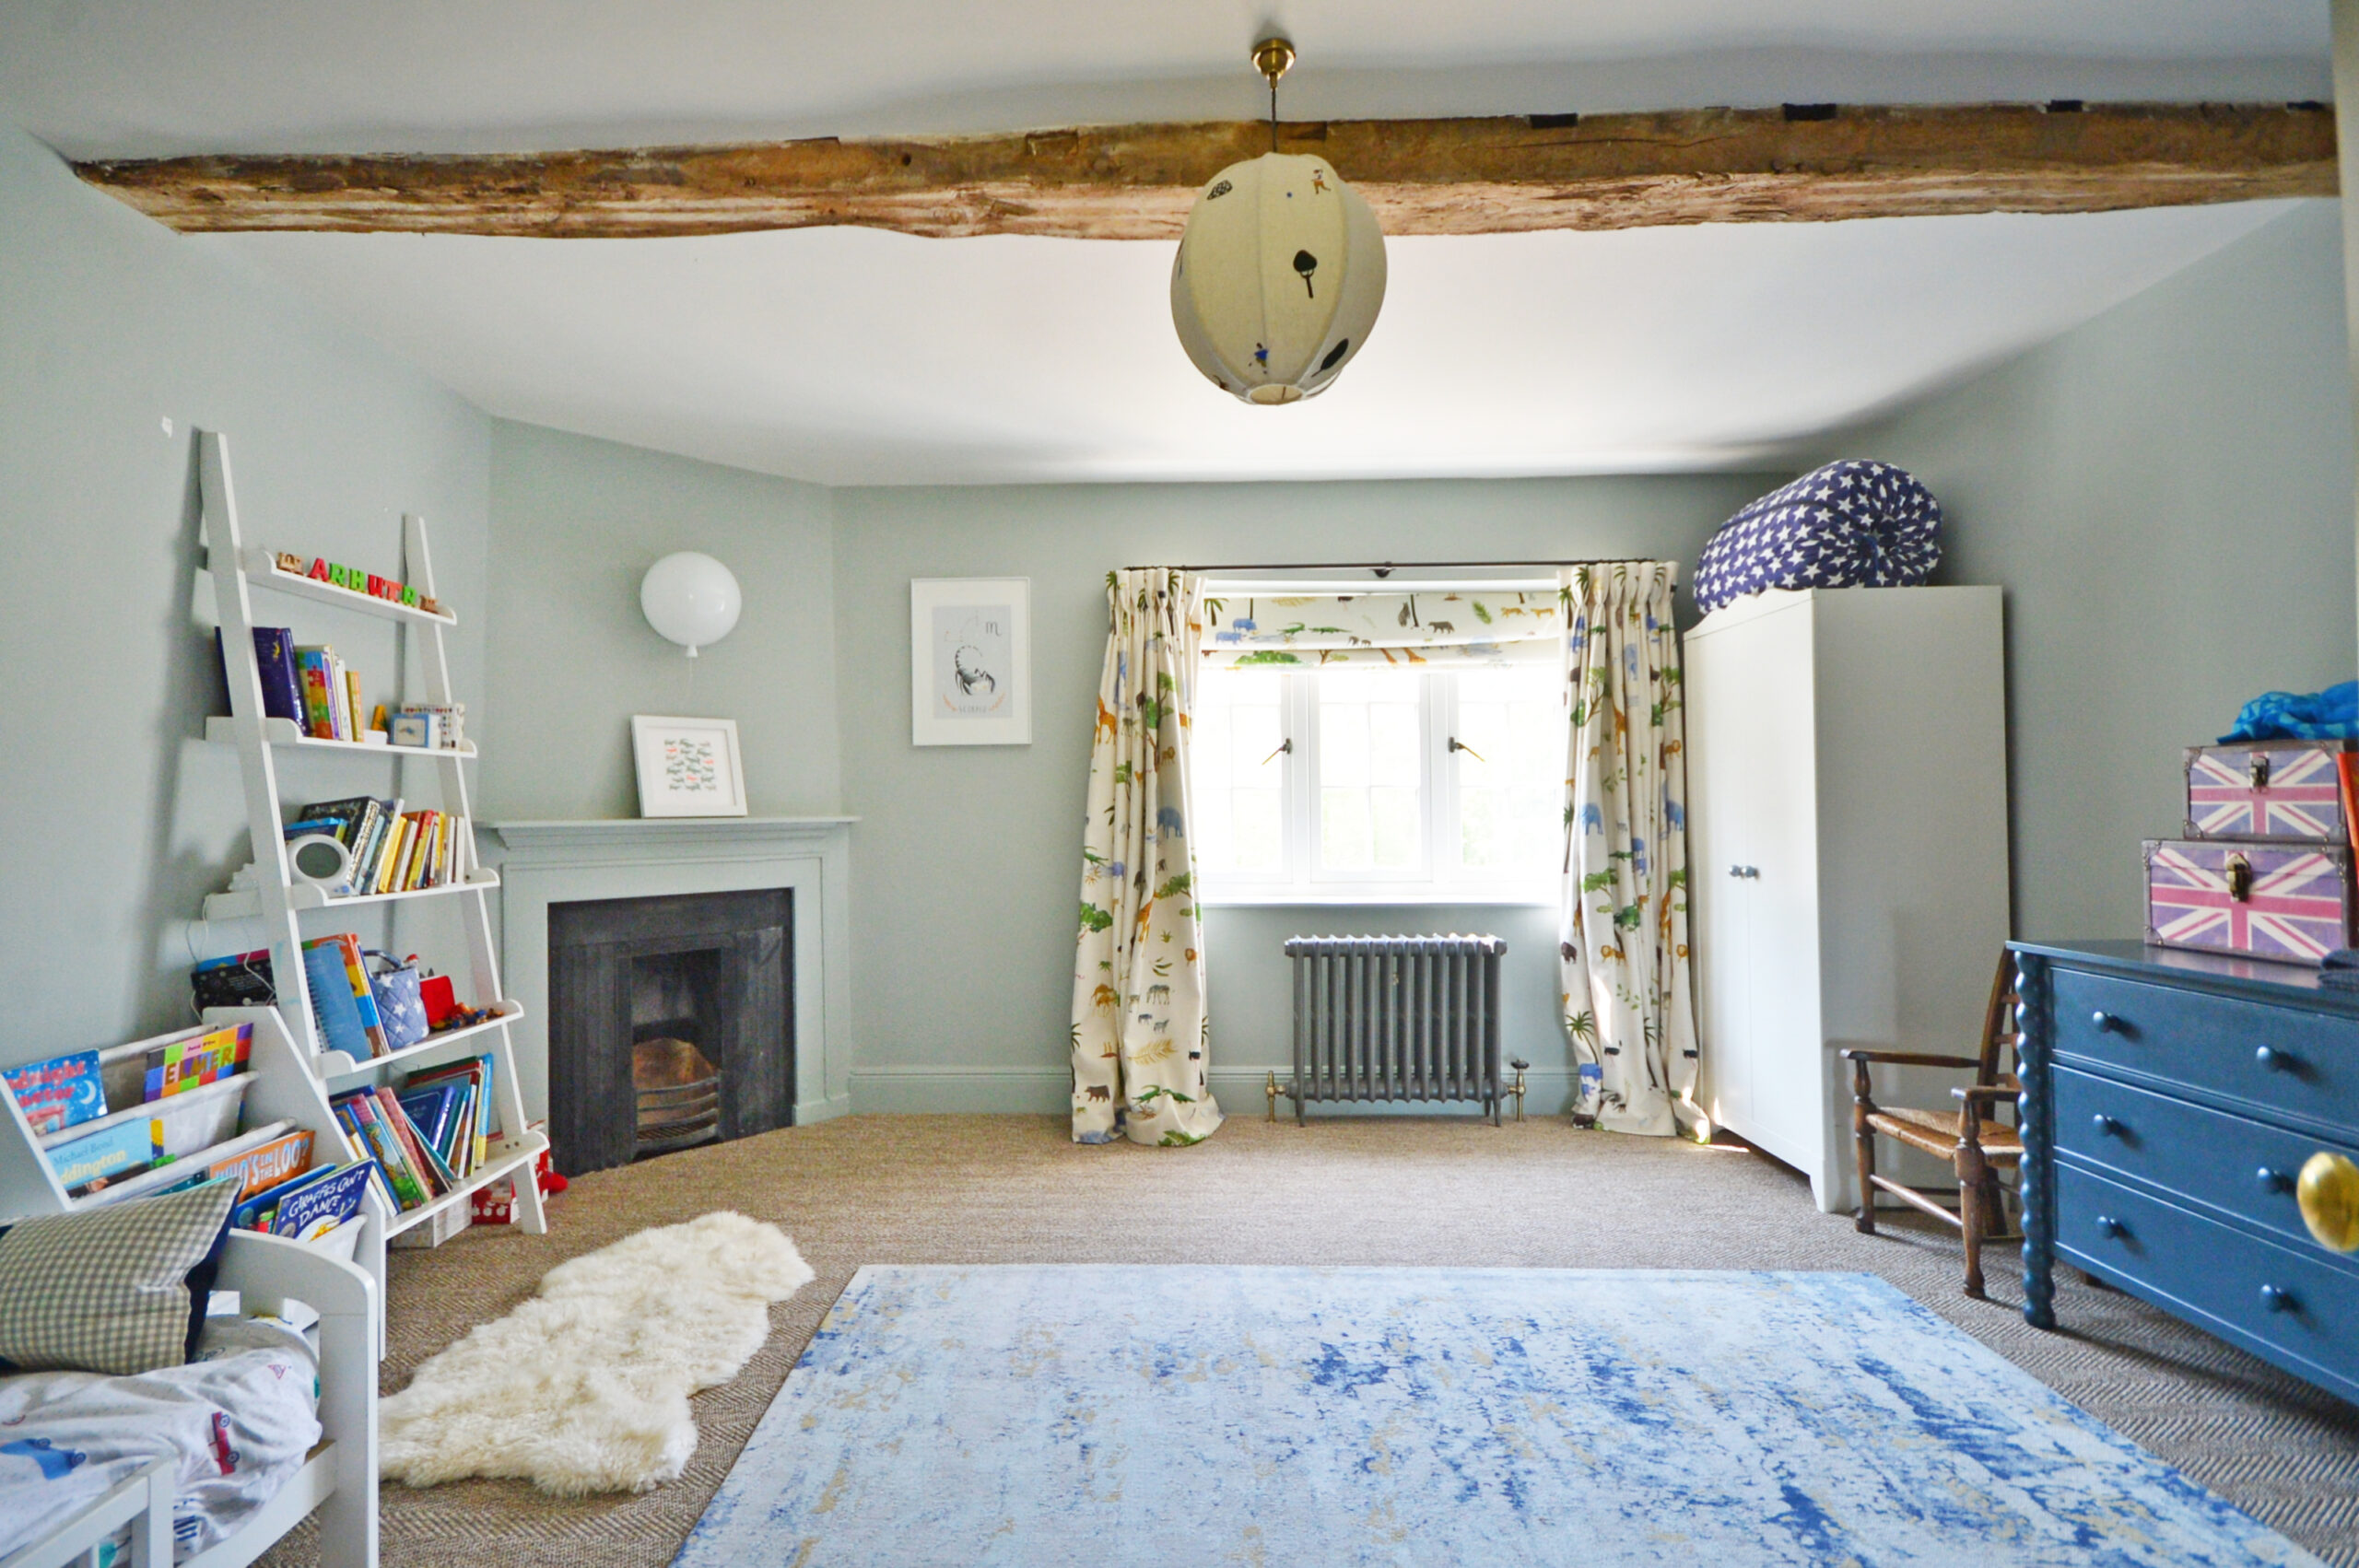 Classic timeless children's room with fireplace brings warmth and cosy vibes to this character property and original features.